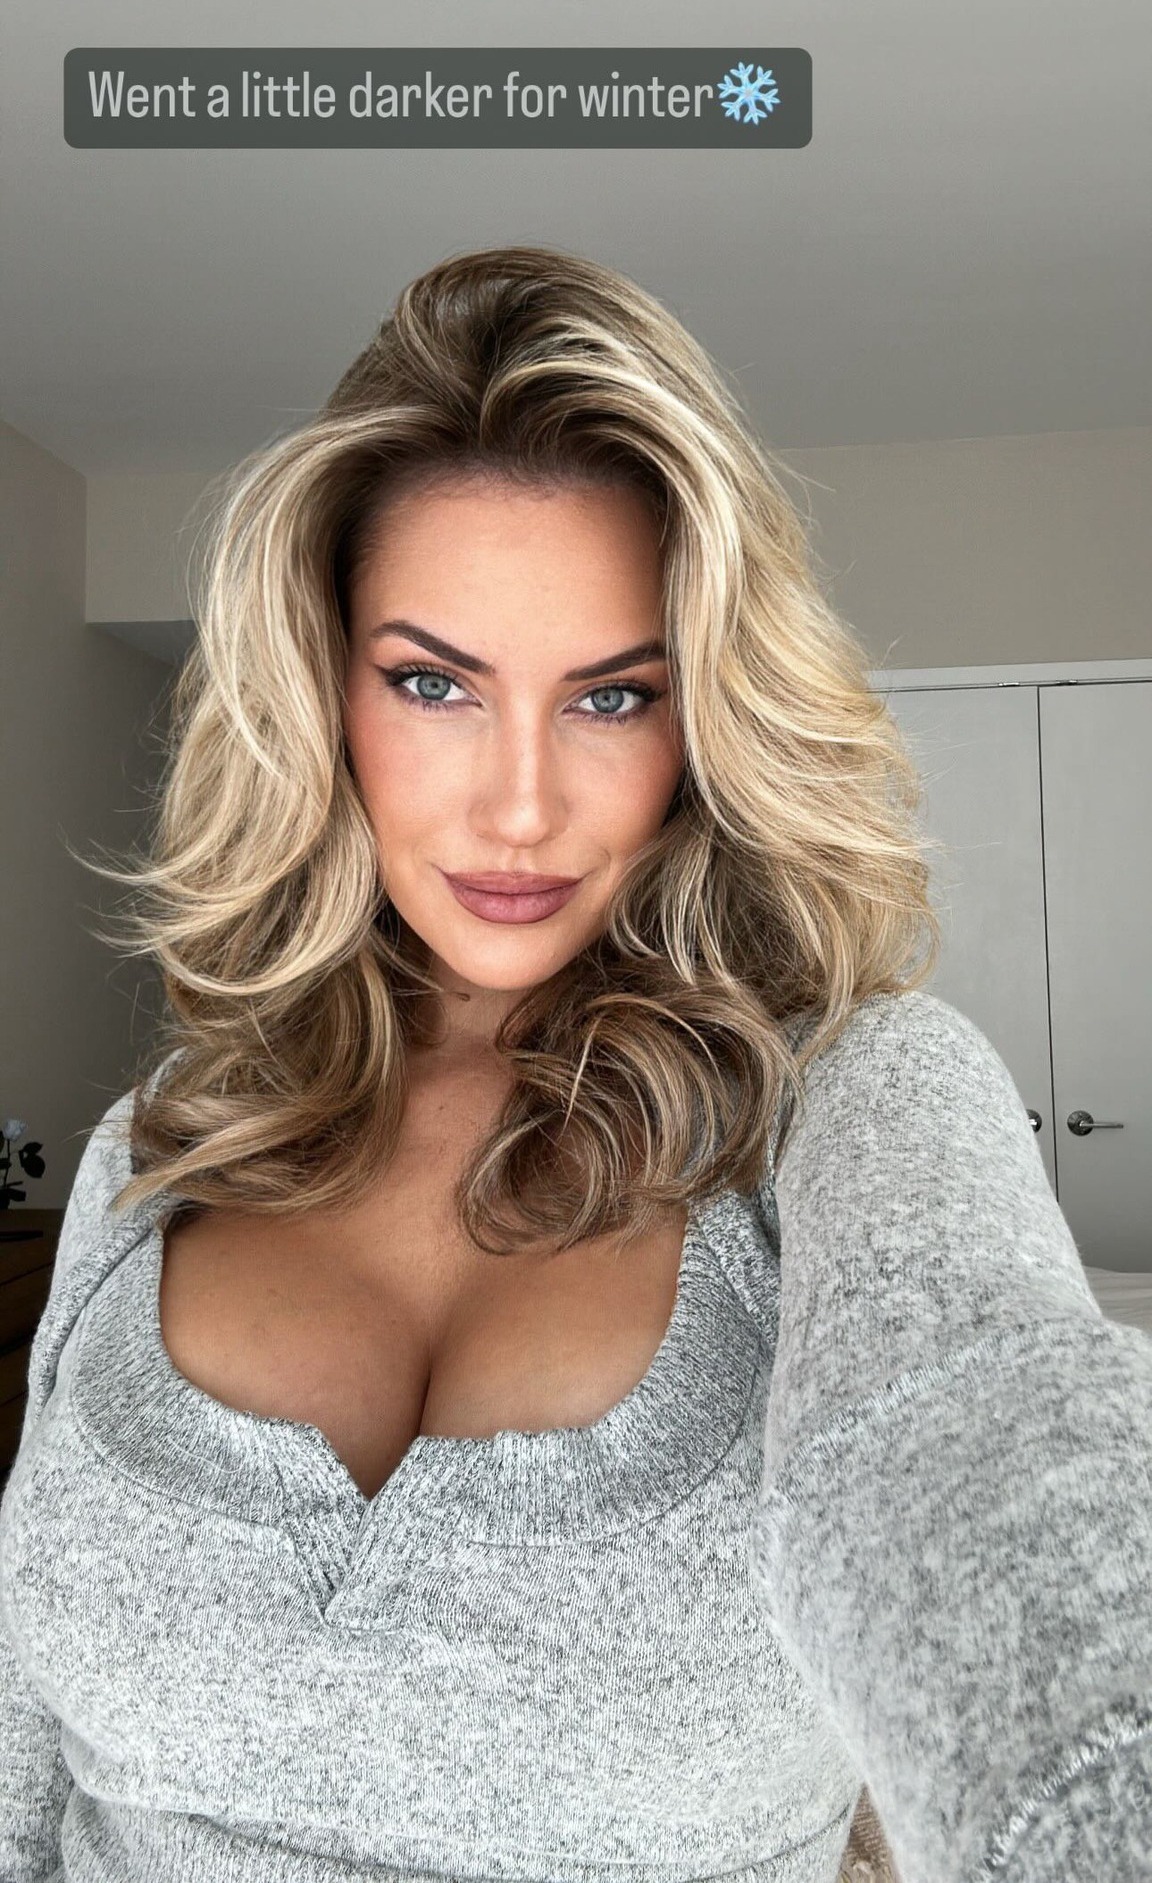 , Paige Spiranac Turns Heads in Low-Cut Jumper as She Prepares for Winter